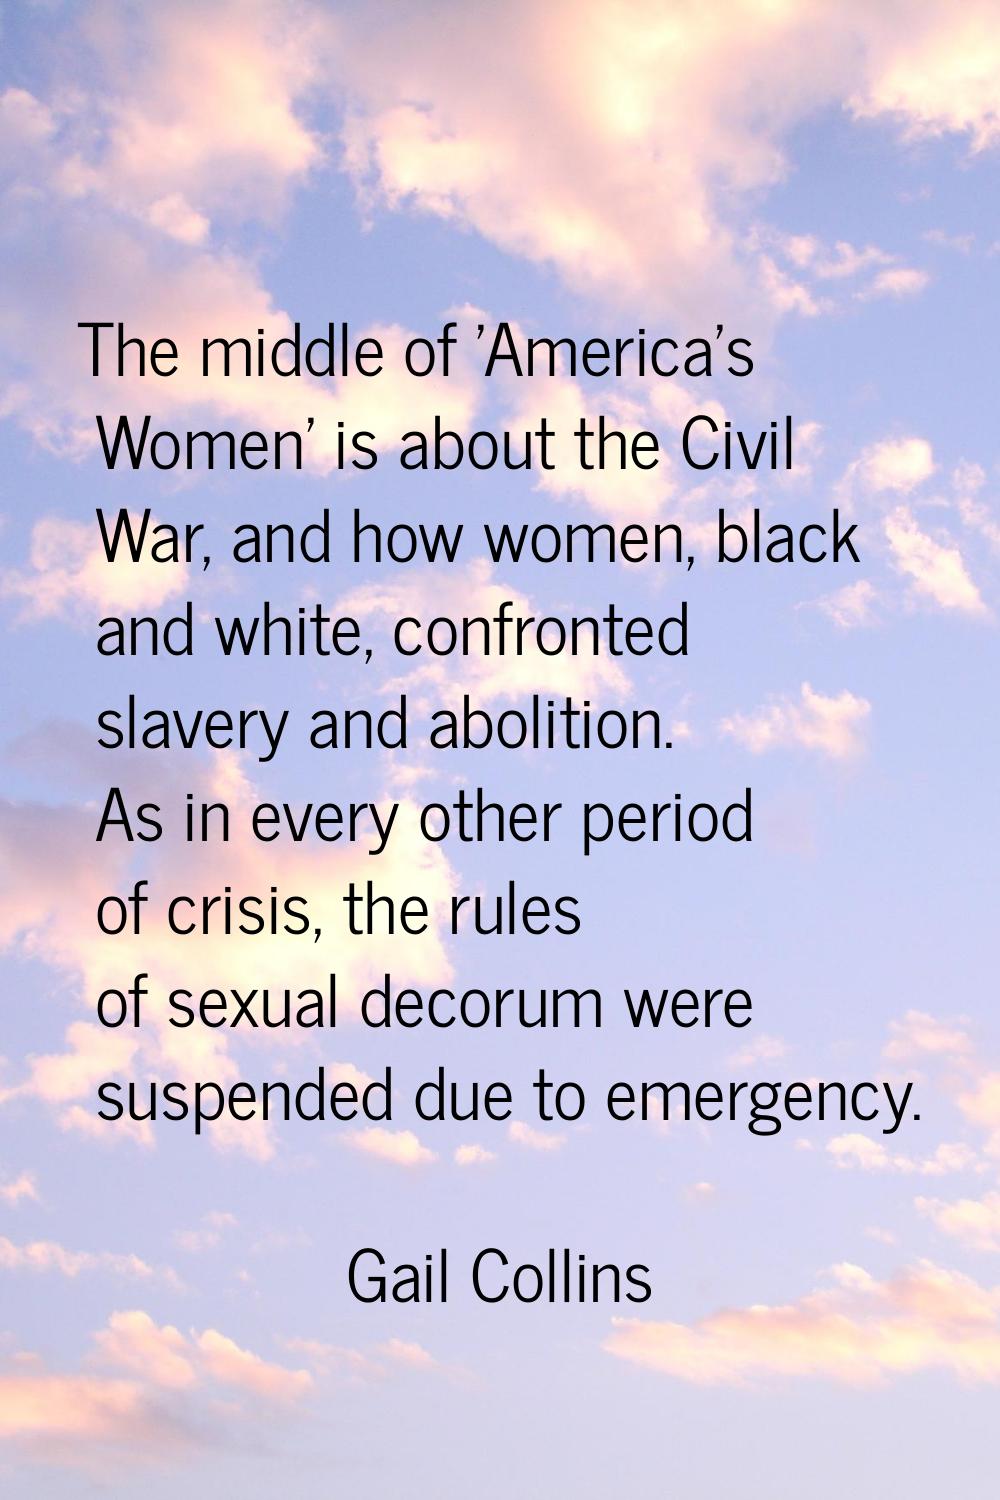 The middle of 'America's Women' is about the Civil War, and how women, black and white, confronted 